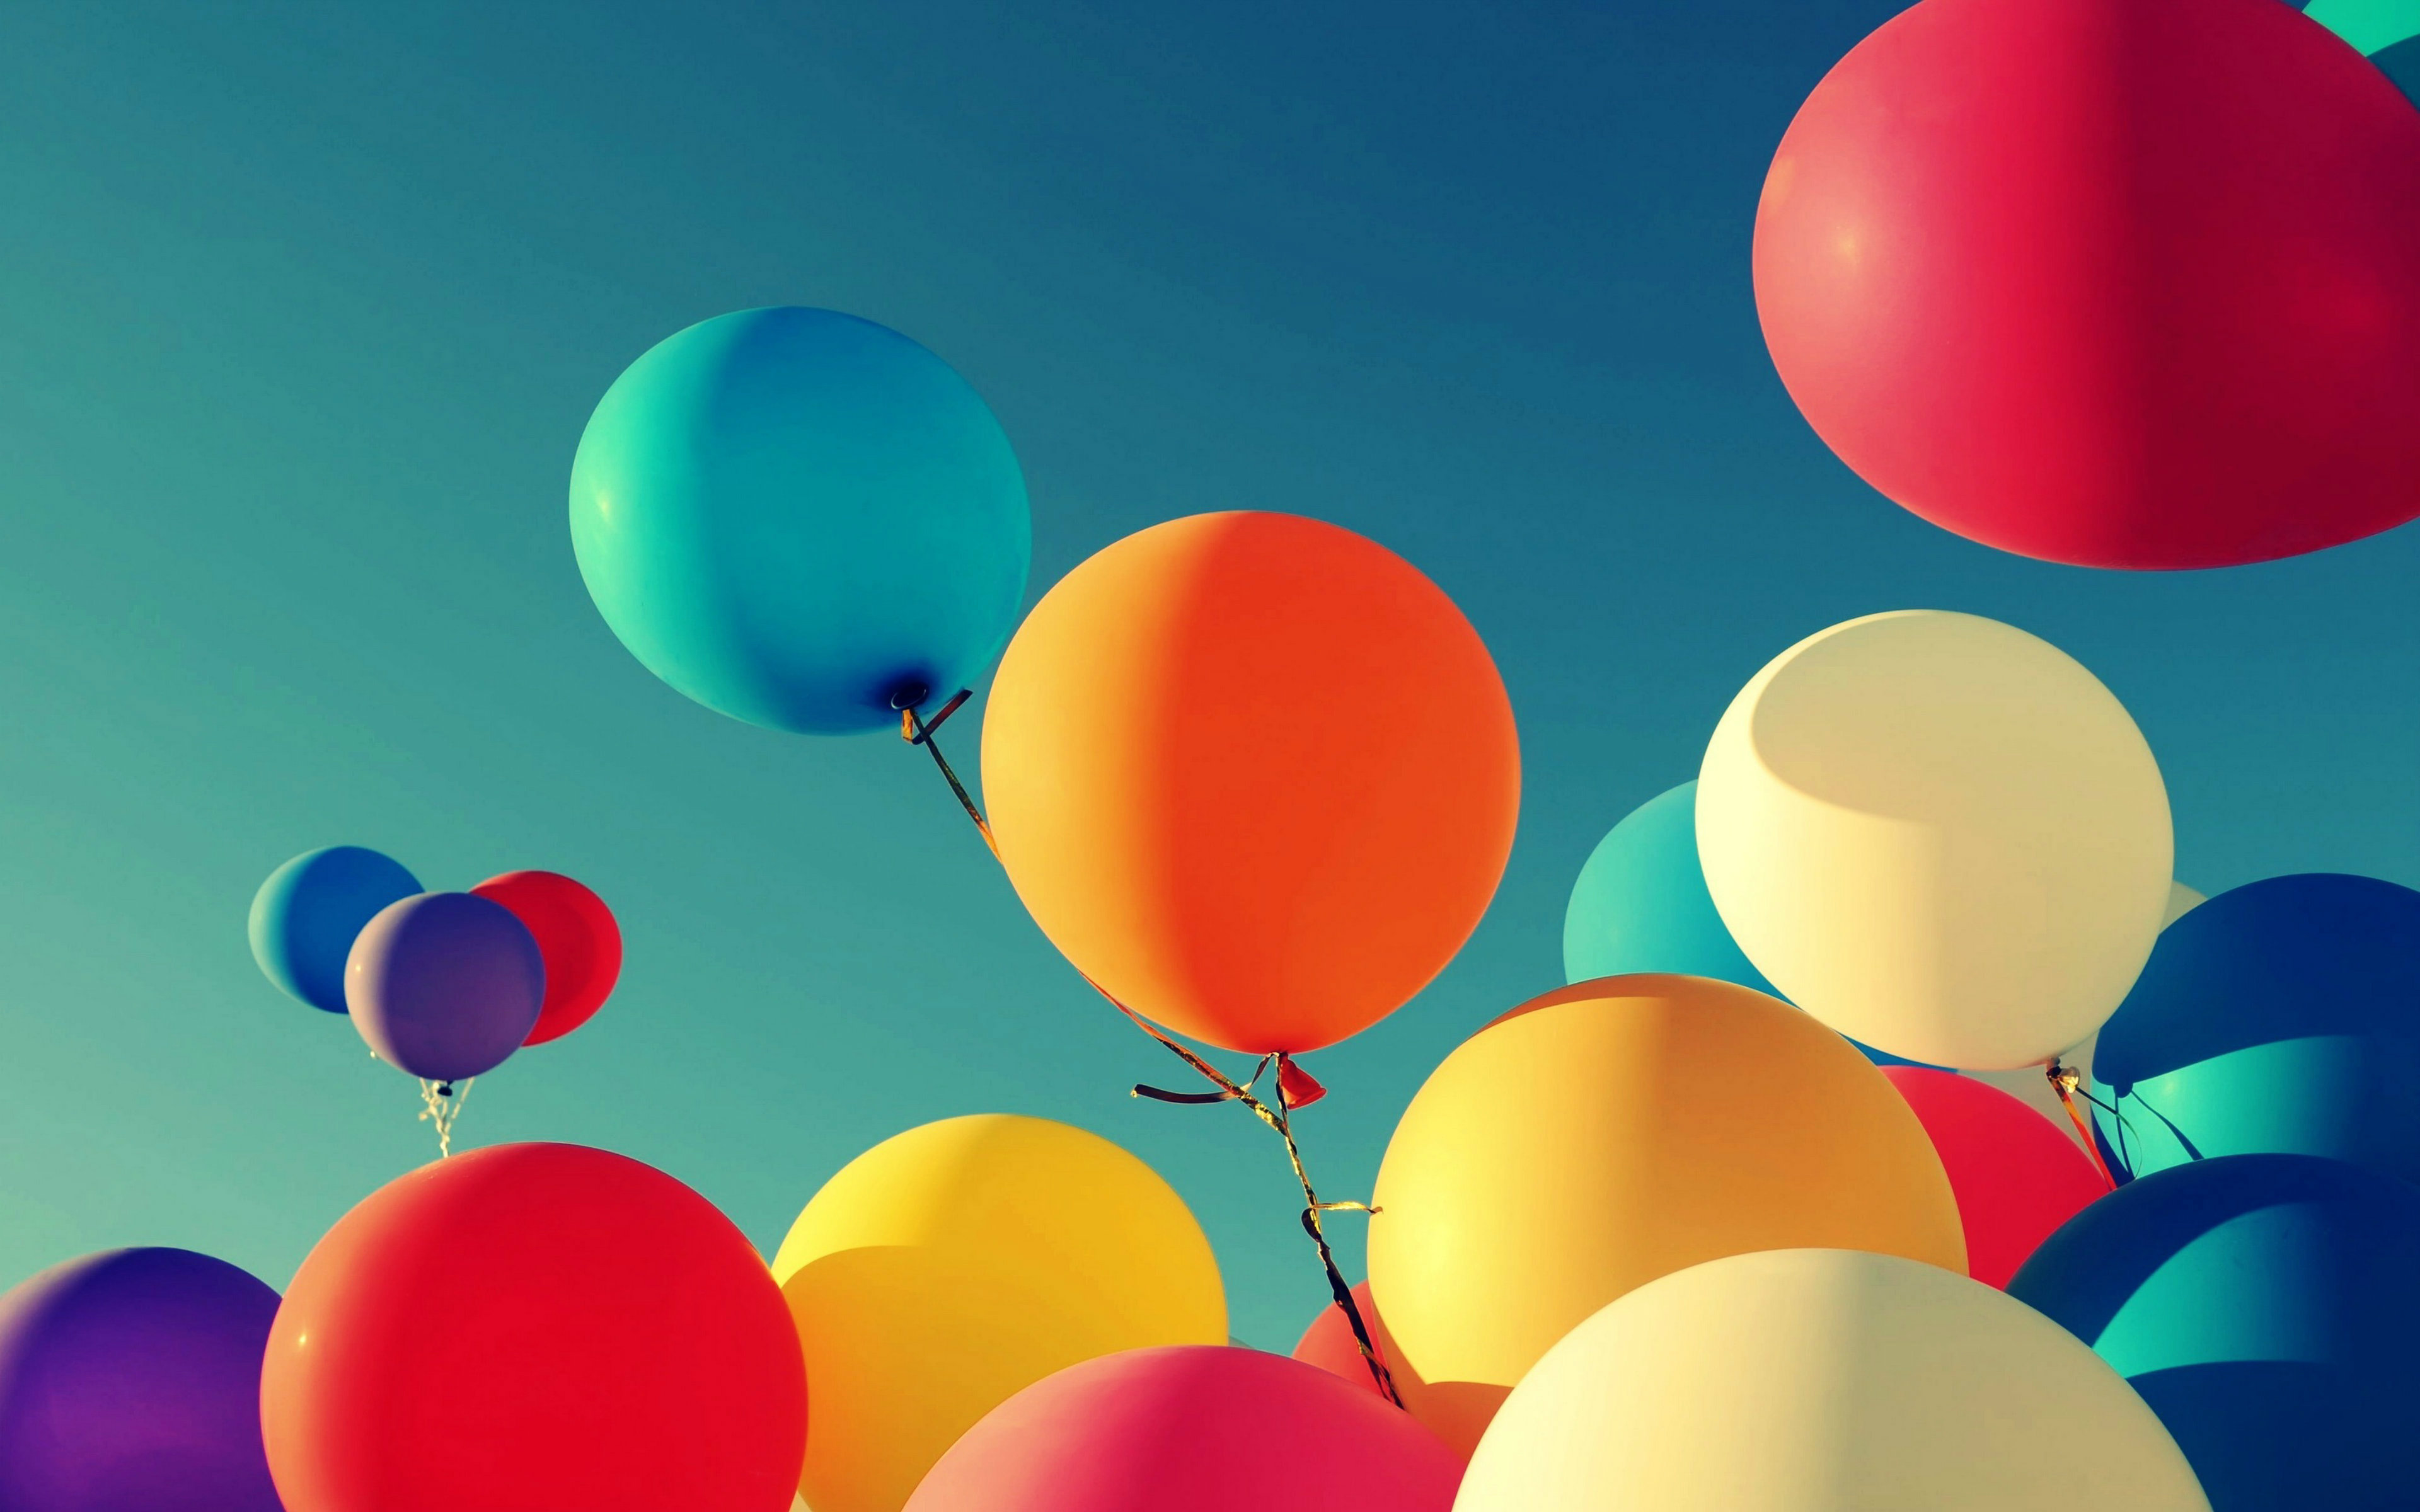 Colorful balloons wallpaper - 1919 | 3840x2400